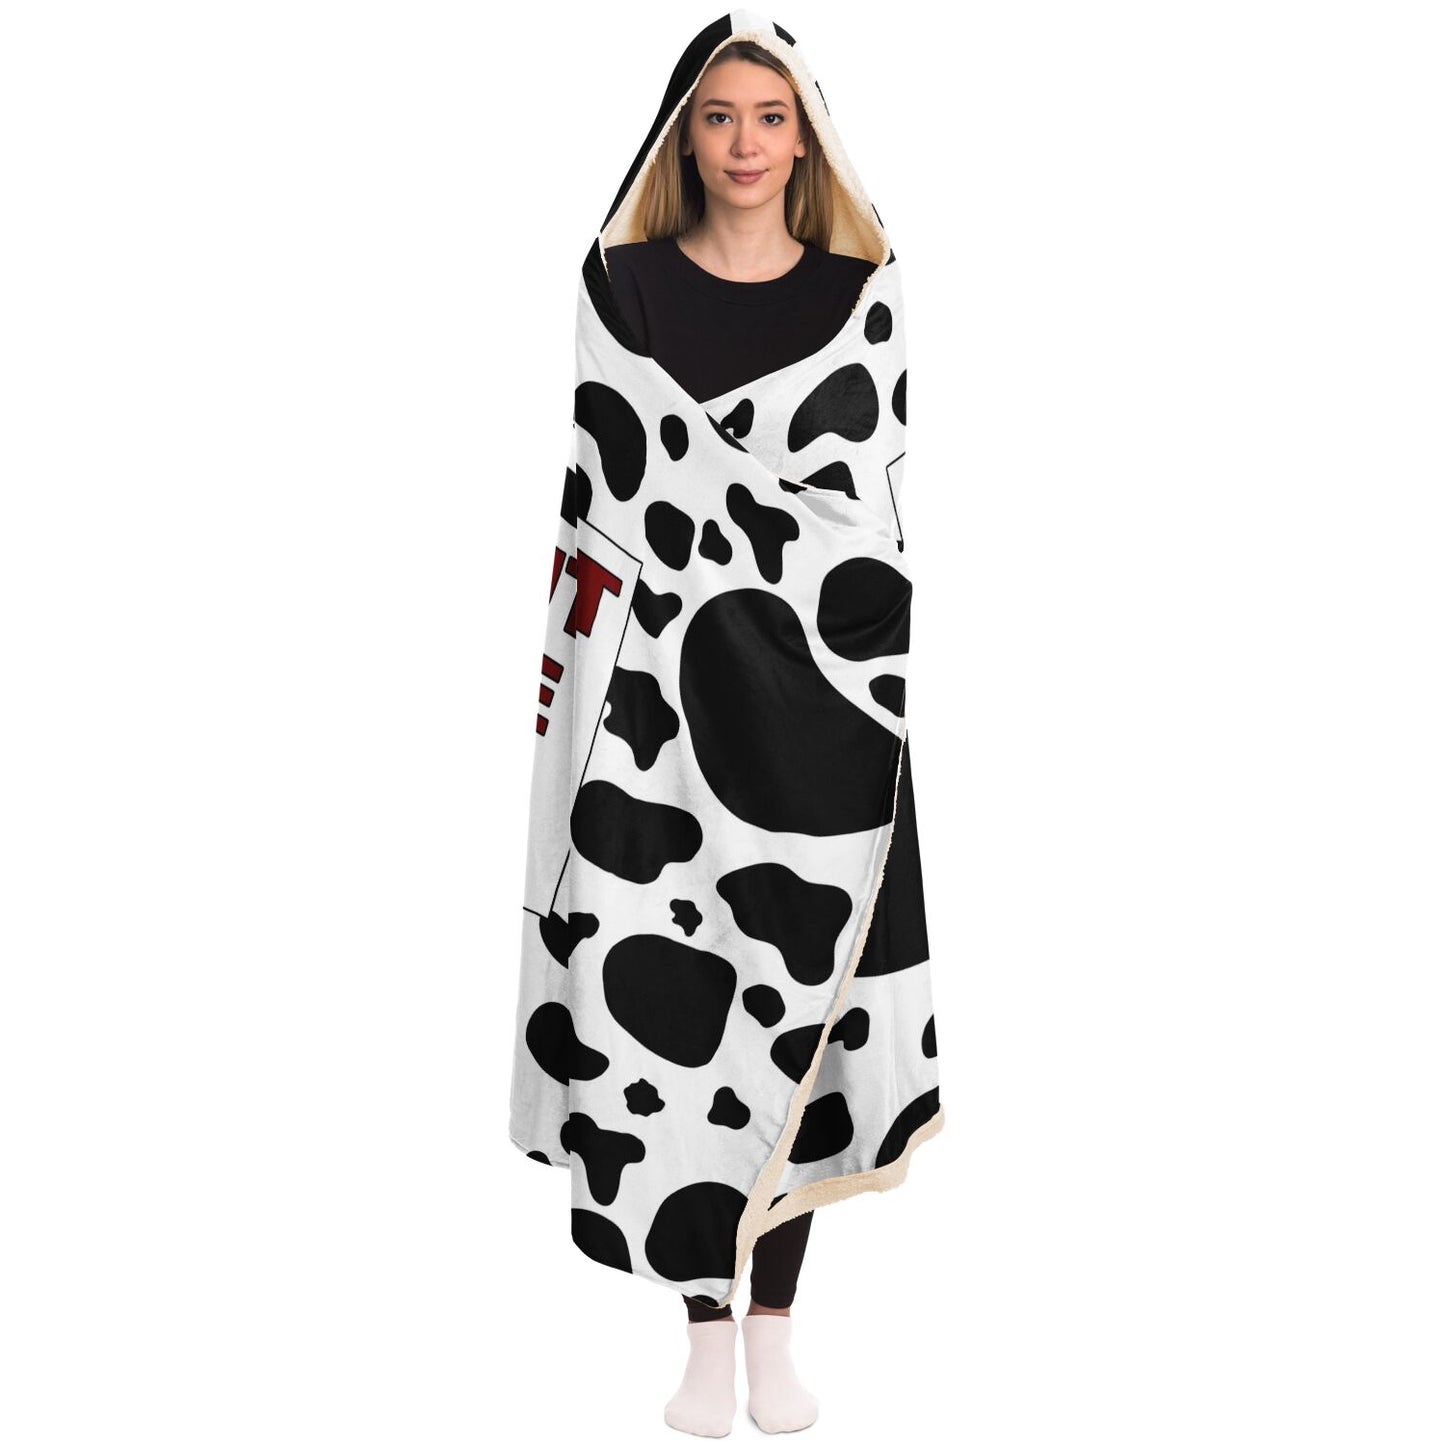 Stand Out from the Herd Hooded Blanket - All Over Print - Sherpa Lined Blanket for Livestock Shows